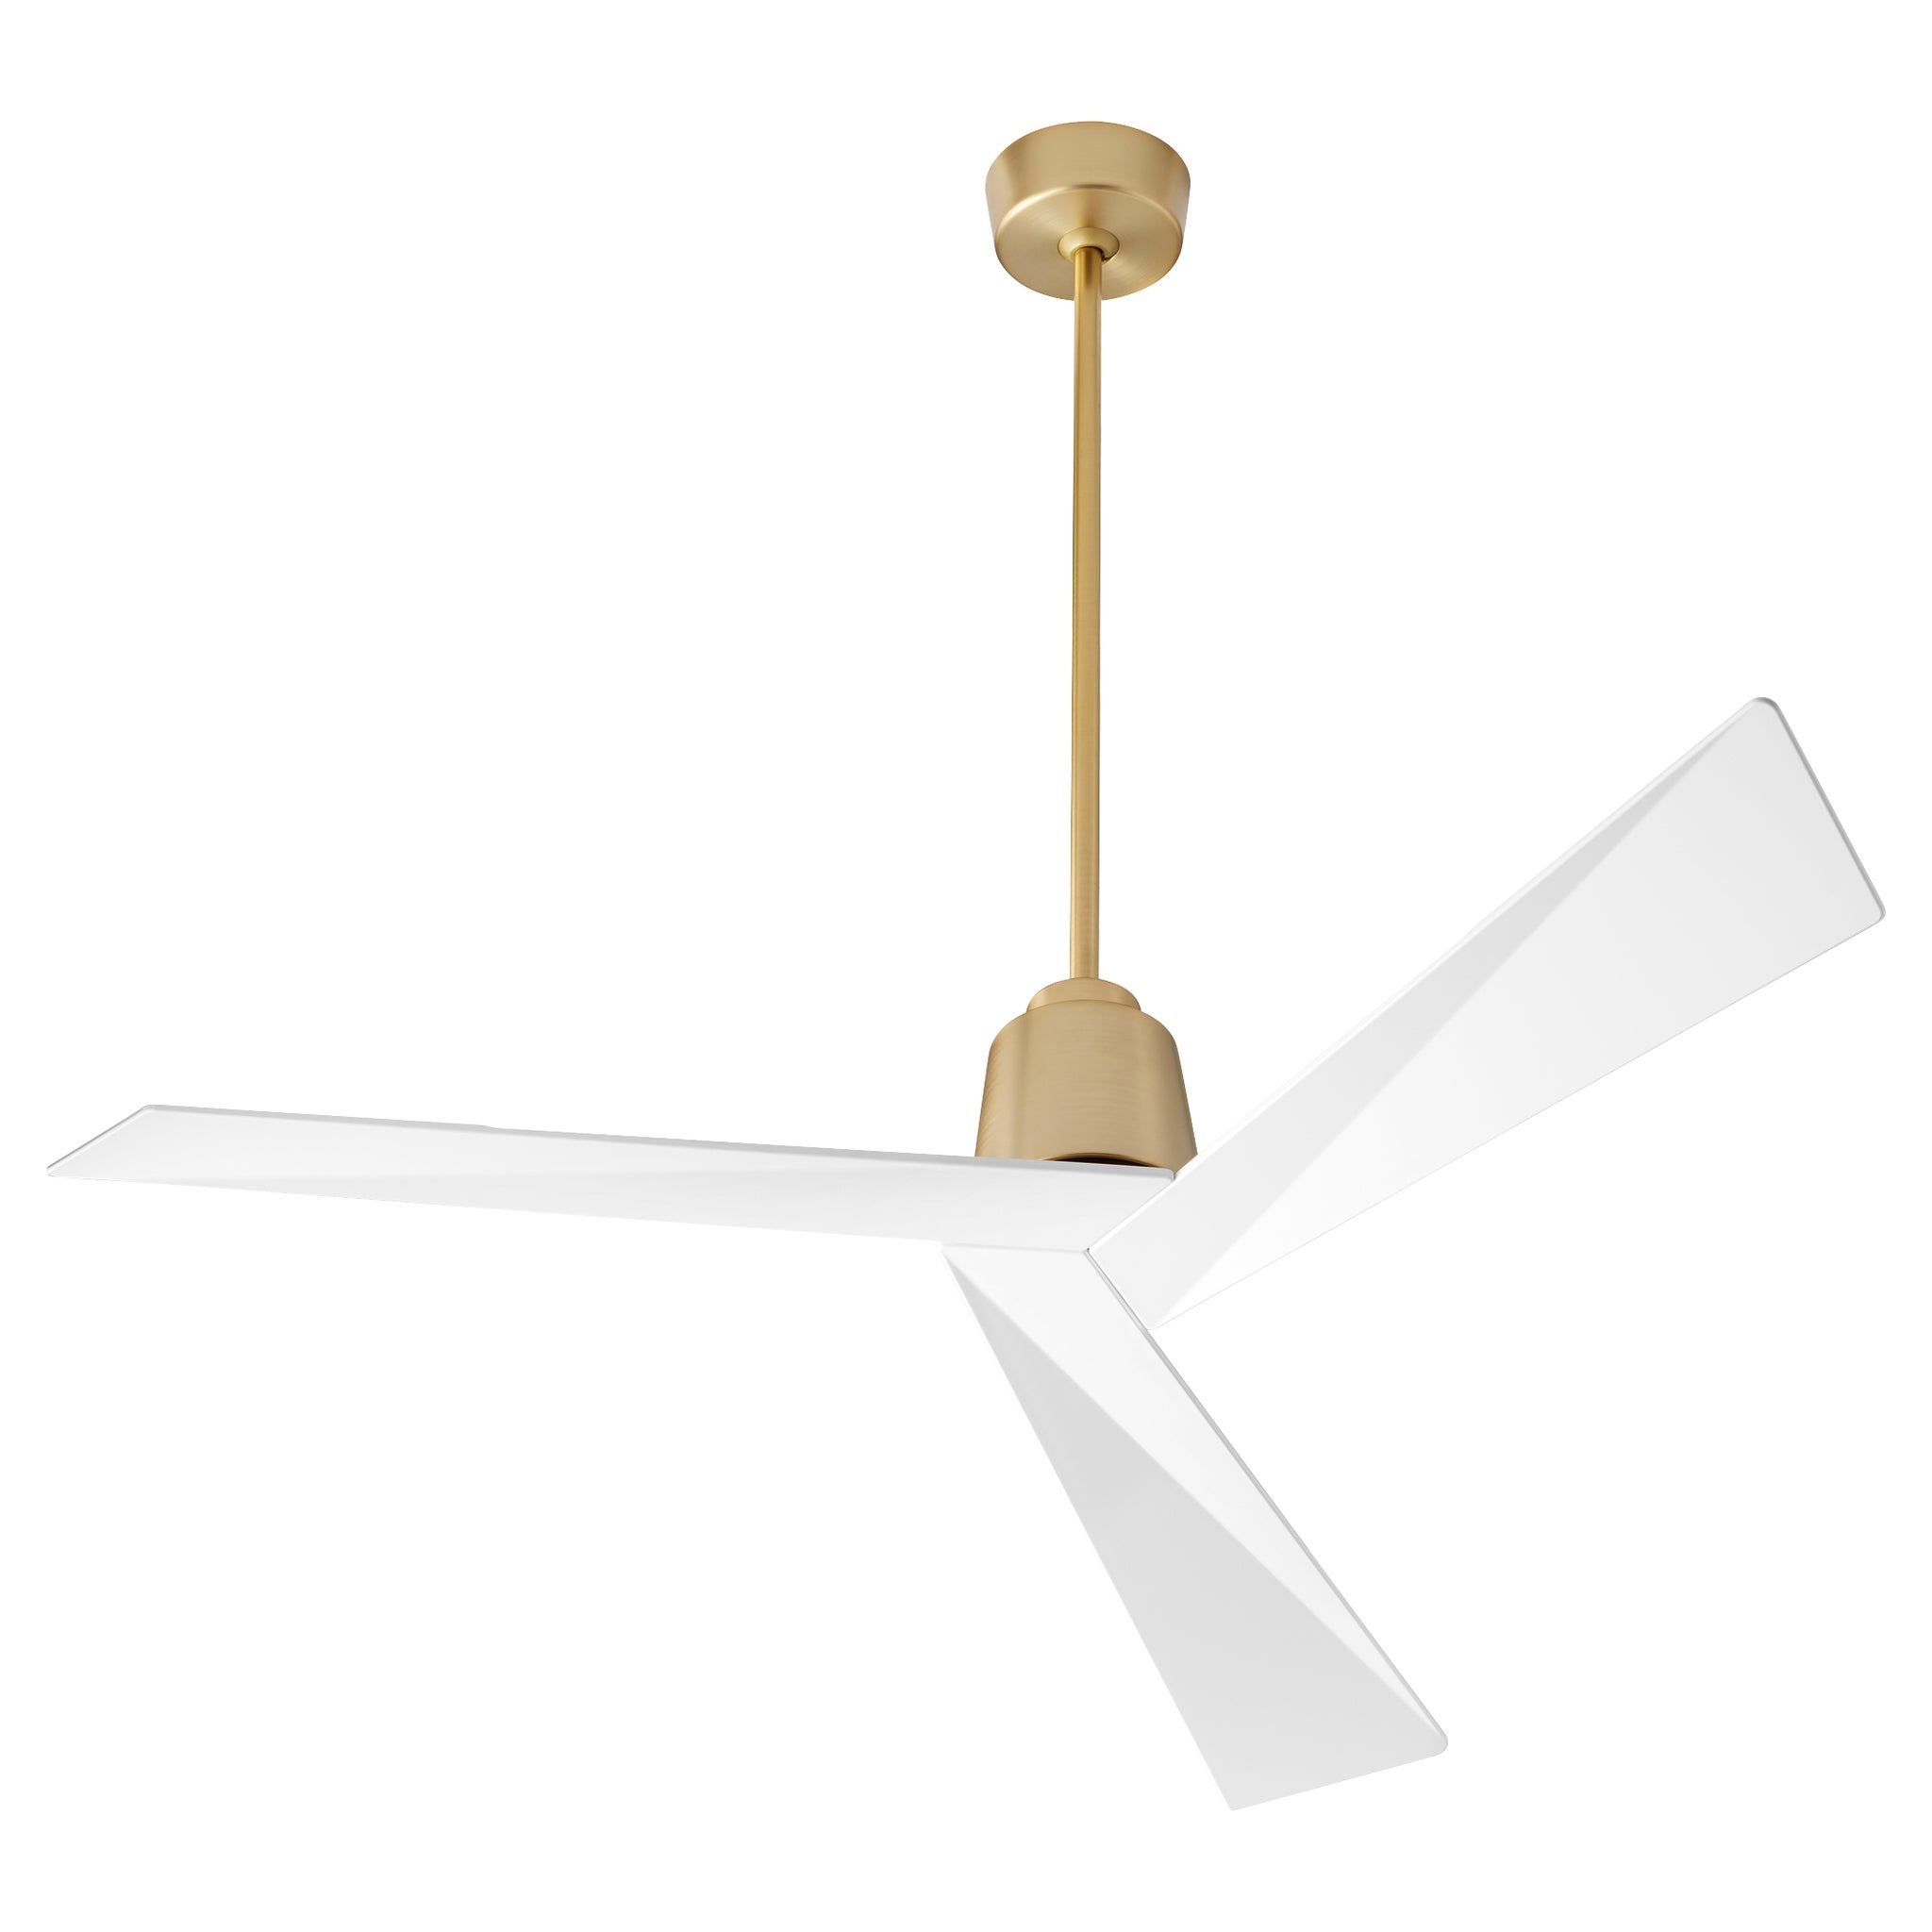 Oxygen DYNAMO 54 Inch Ceiling Fan - Modern, Contemporary - Damp Rated - 6 Speeds - Reversible with Remote